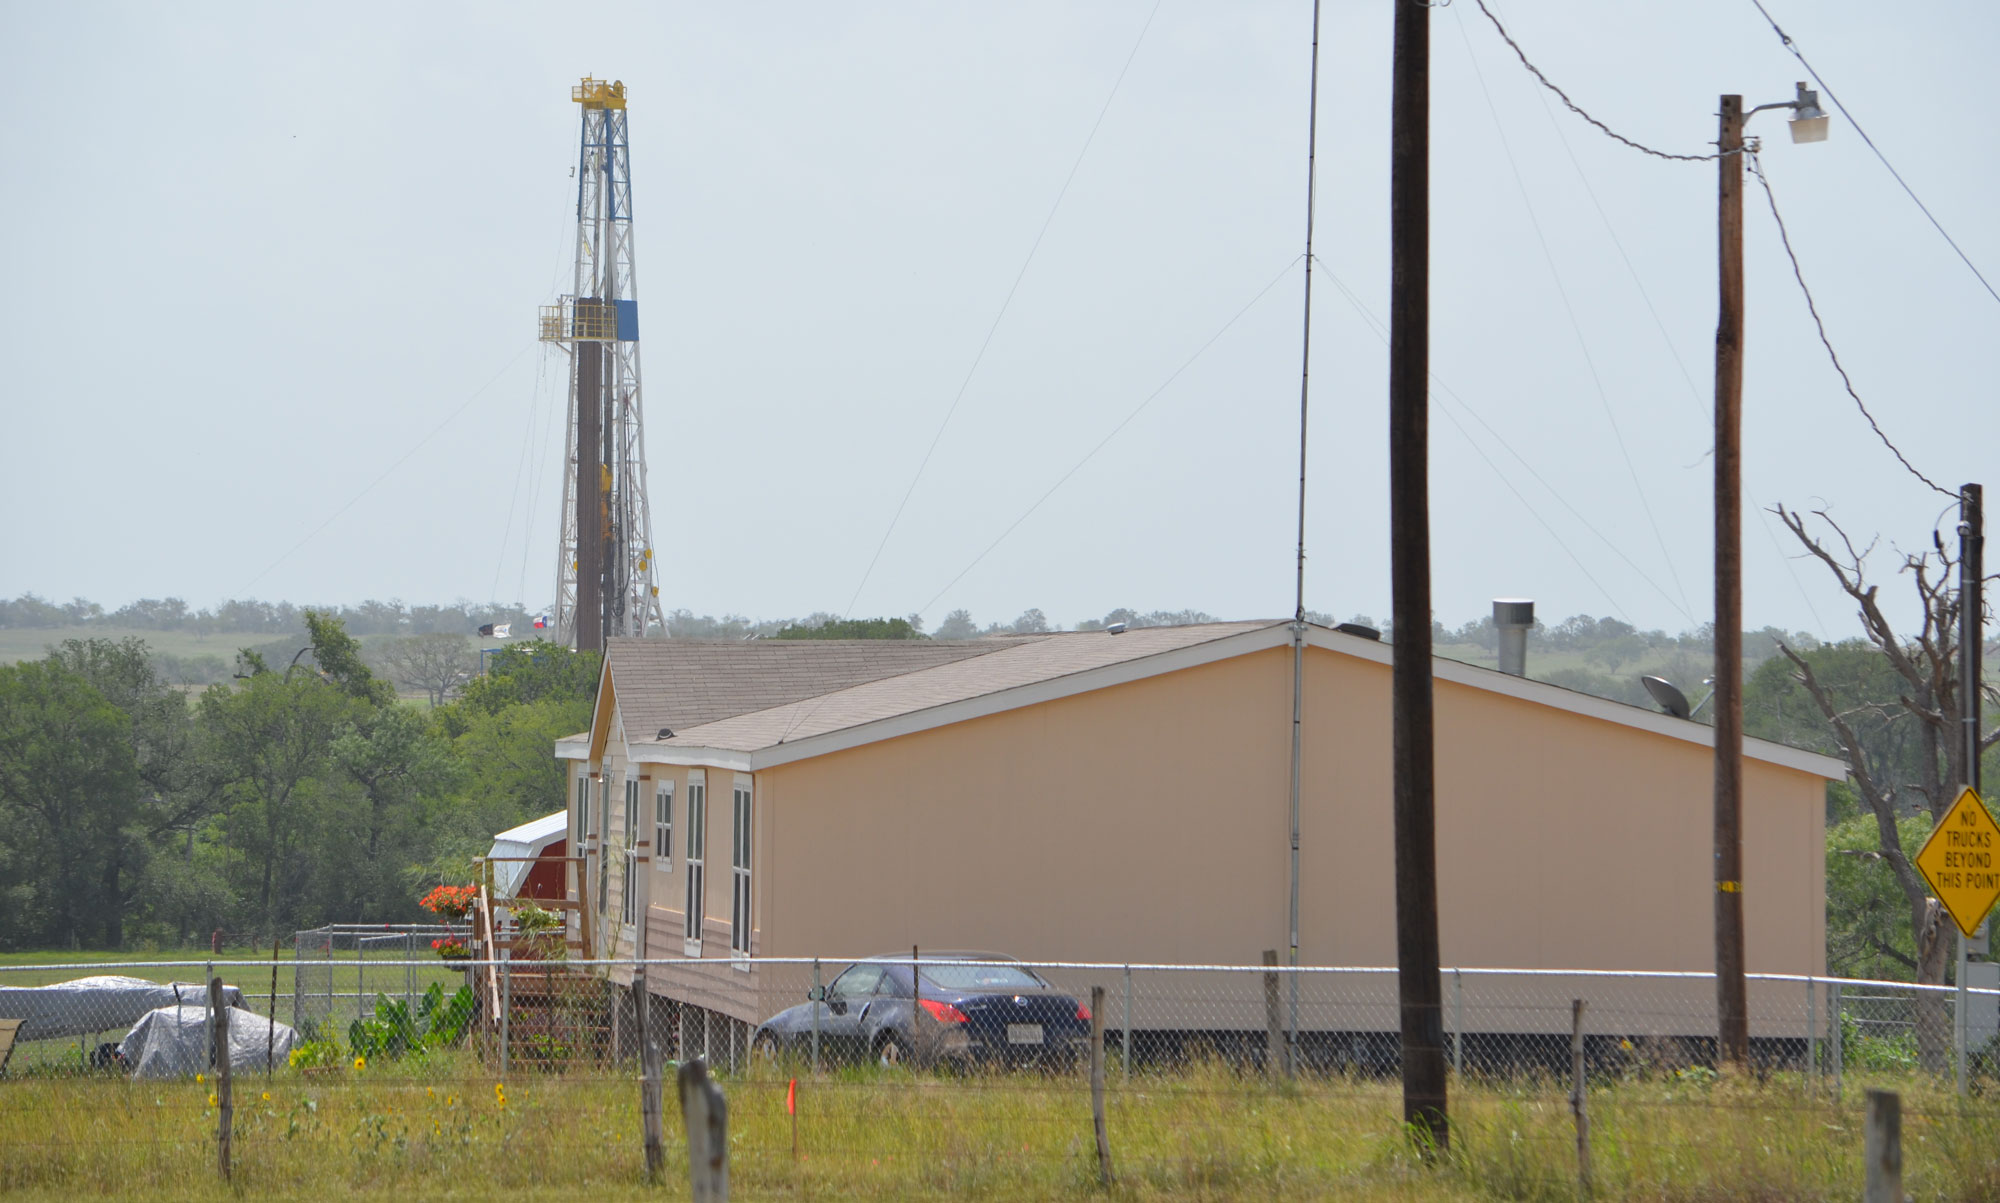 Photograph of a drill rig near a home in the Eagle Ford Shale. The home is in the foreground, the tower of the drill rig behind some trees in the background.